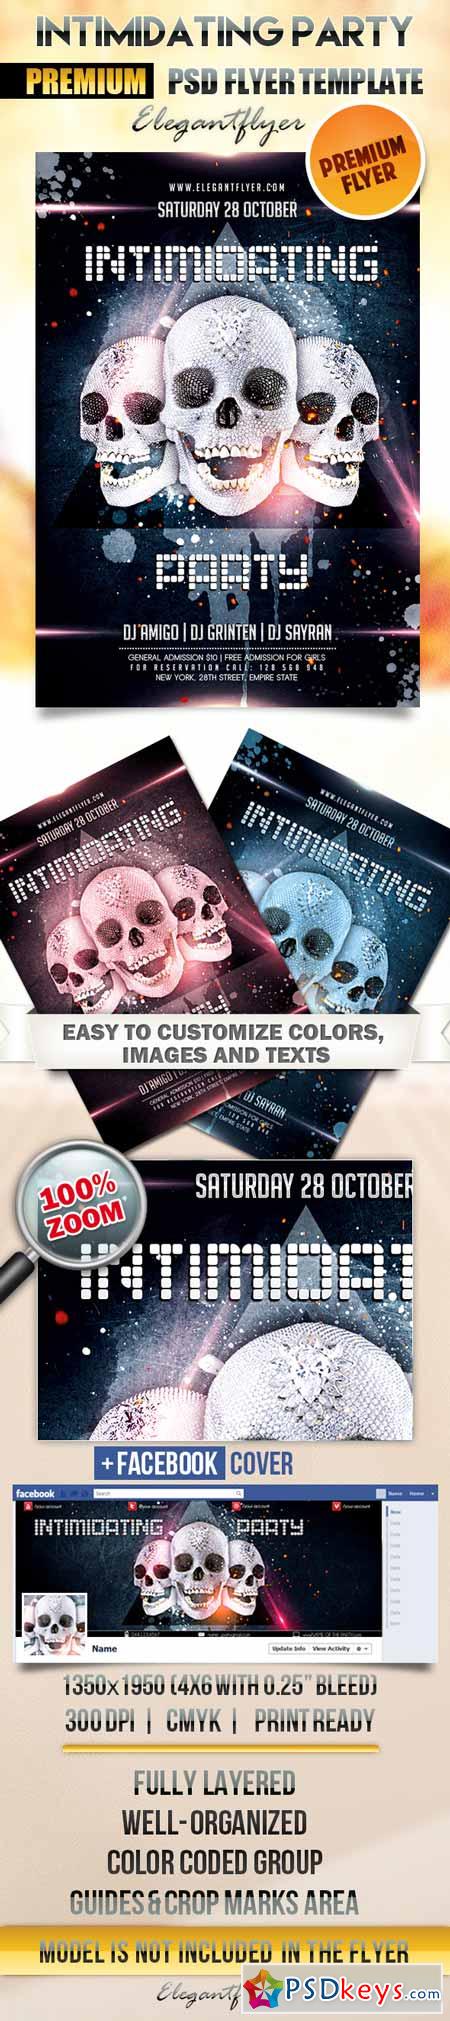 Intimidating Party  Flyer PSD Template + Facebook Cover